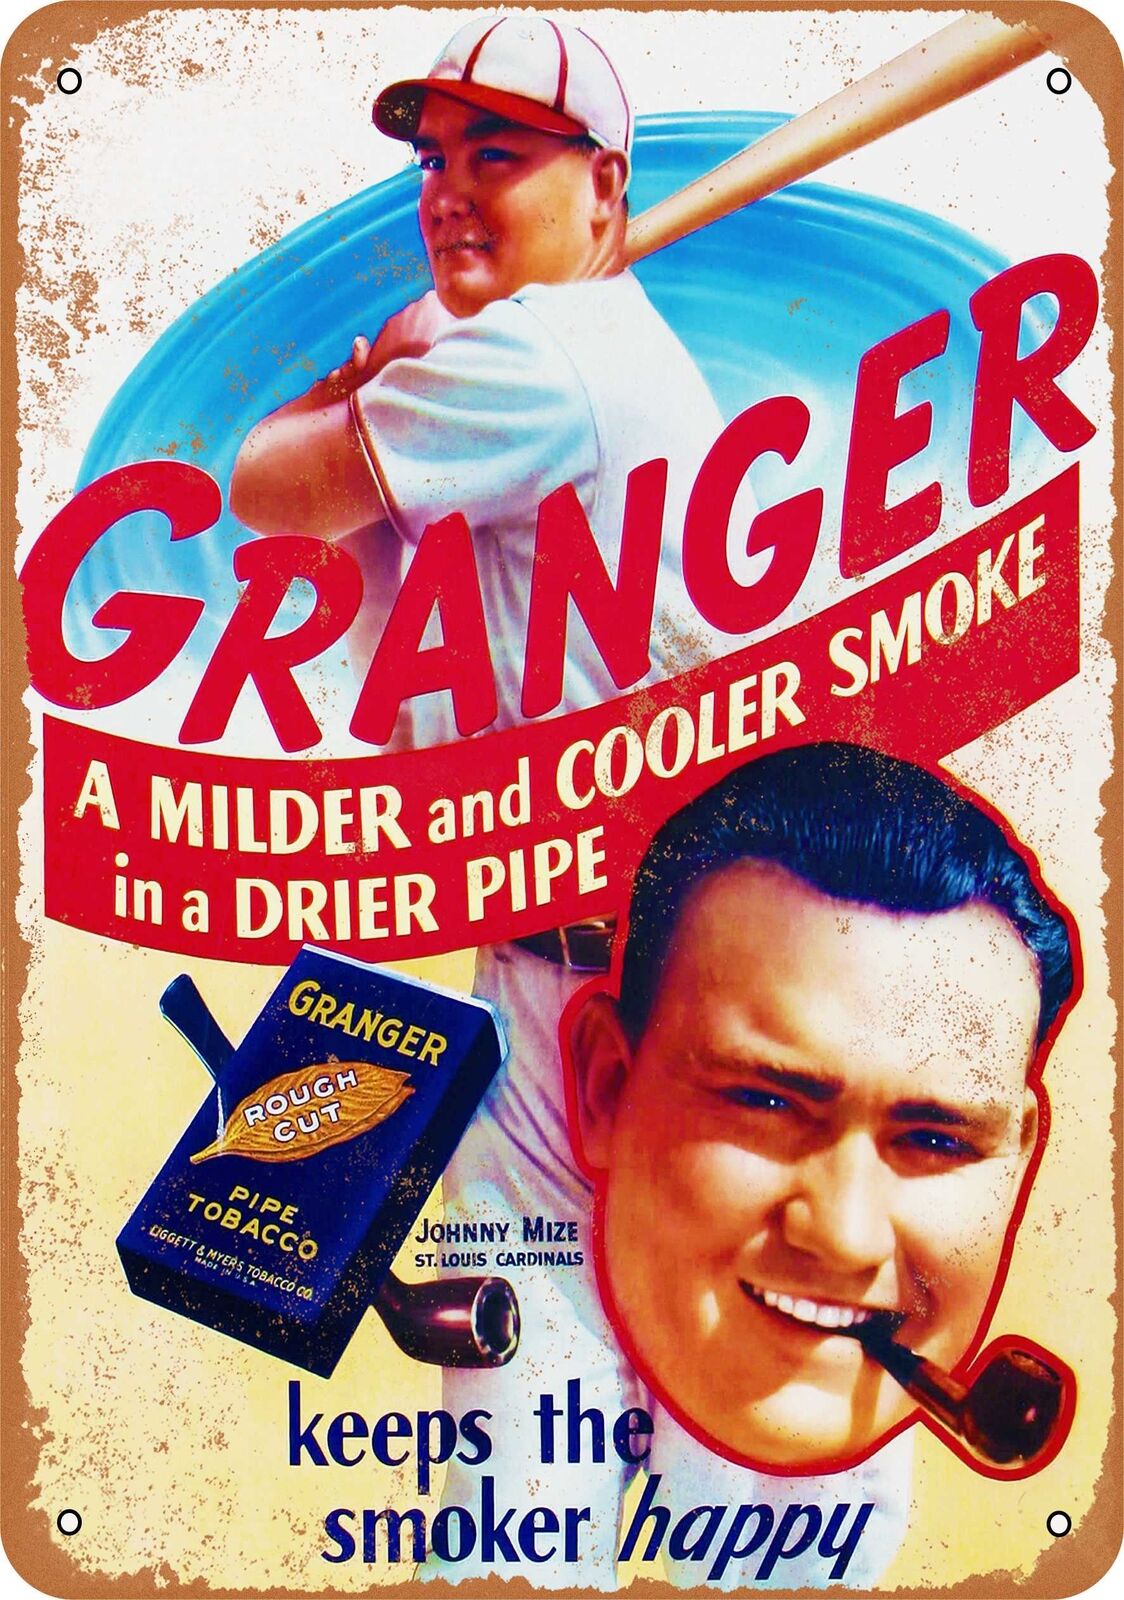 Metal Sign - Johnny Mize for Granger Pipe Tobacco - Vintage Look Reproduction